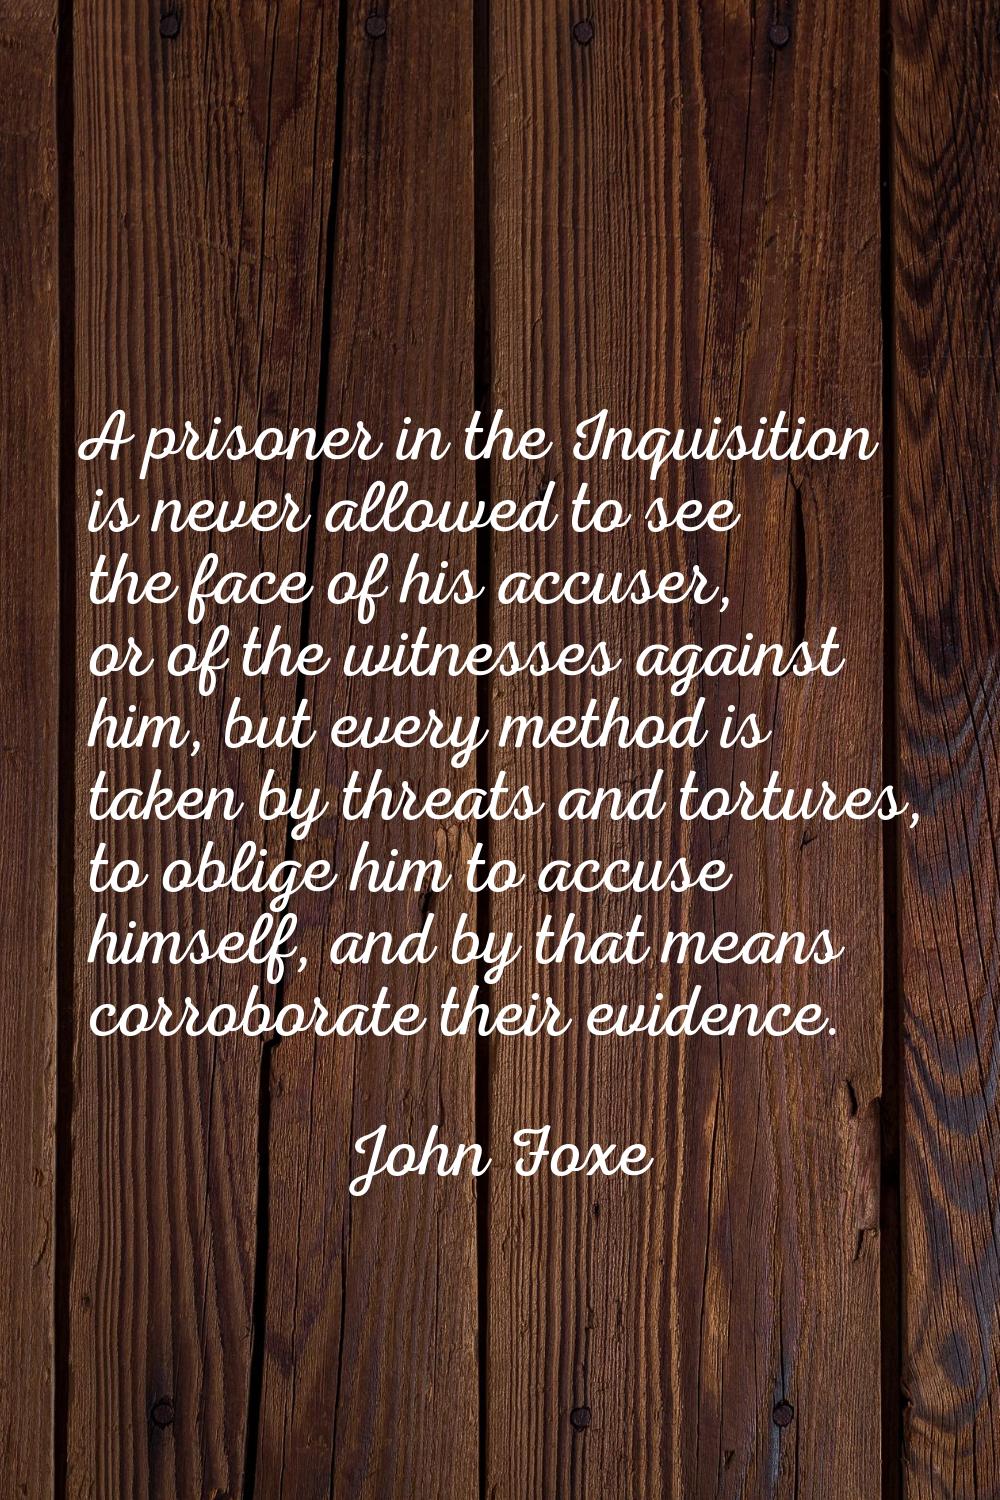 A prisoner in the Inquisition is never allowed to see the face of his accuser, or of the witnesses 